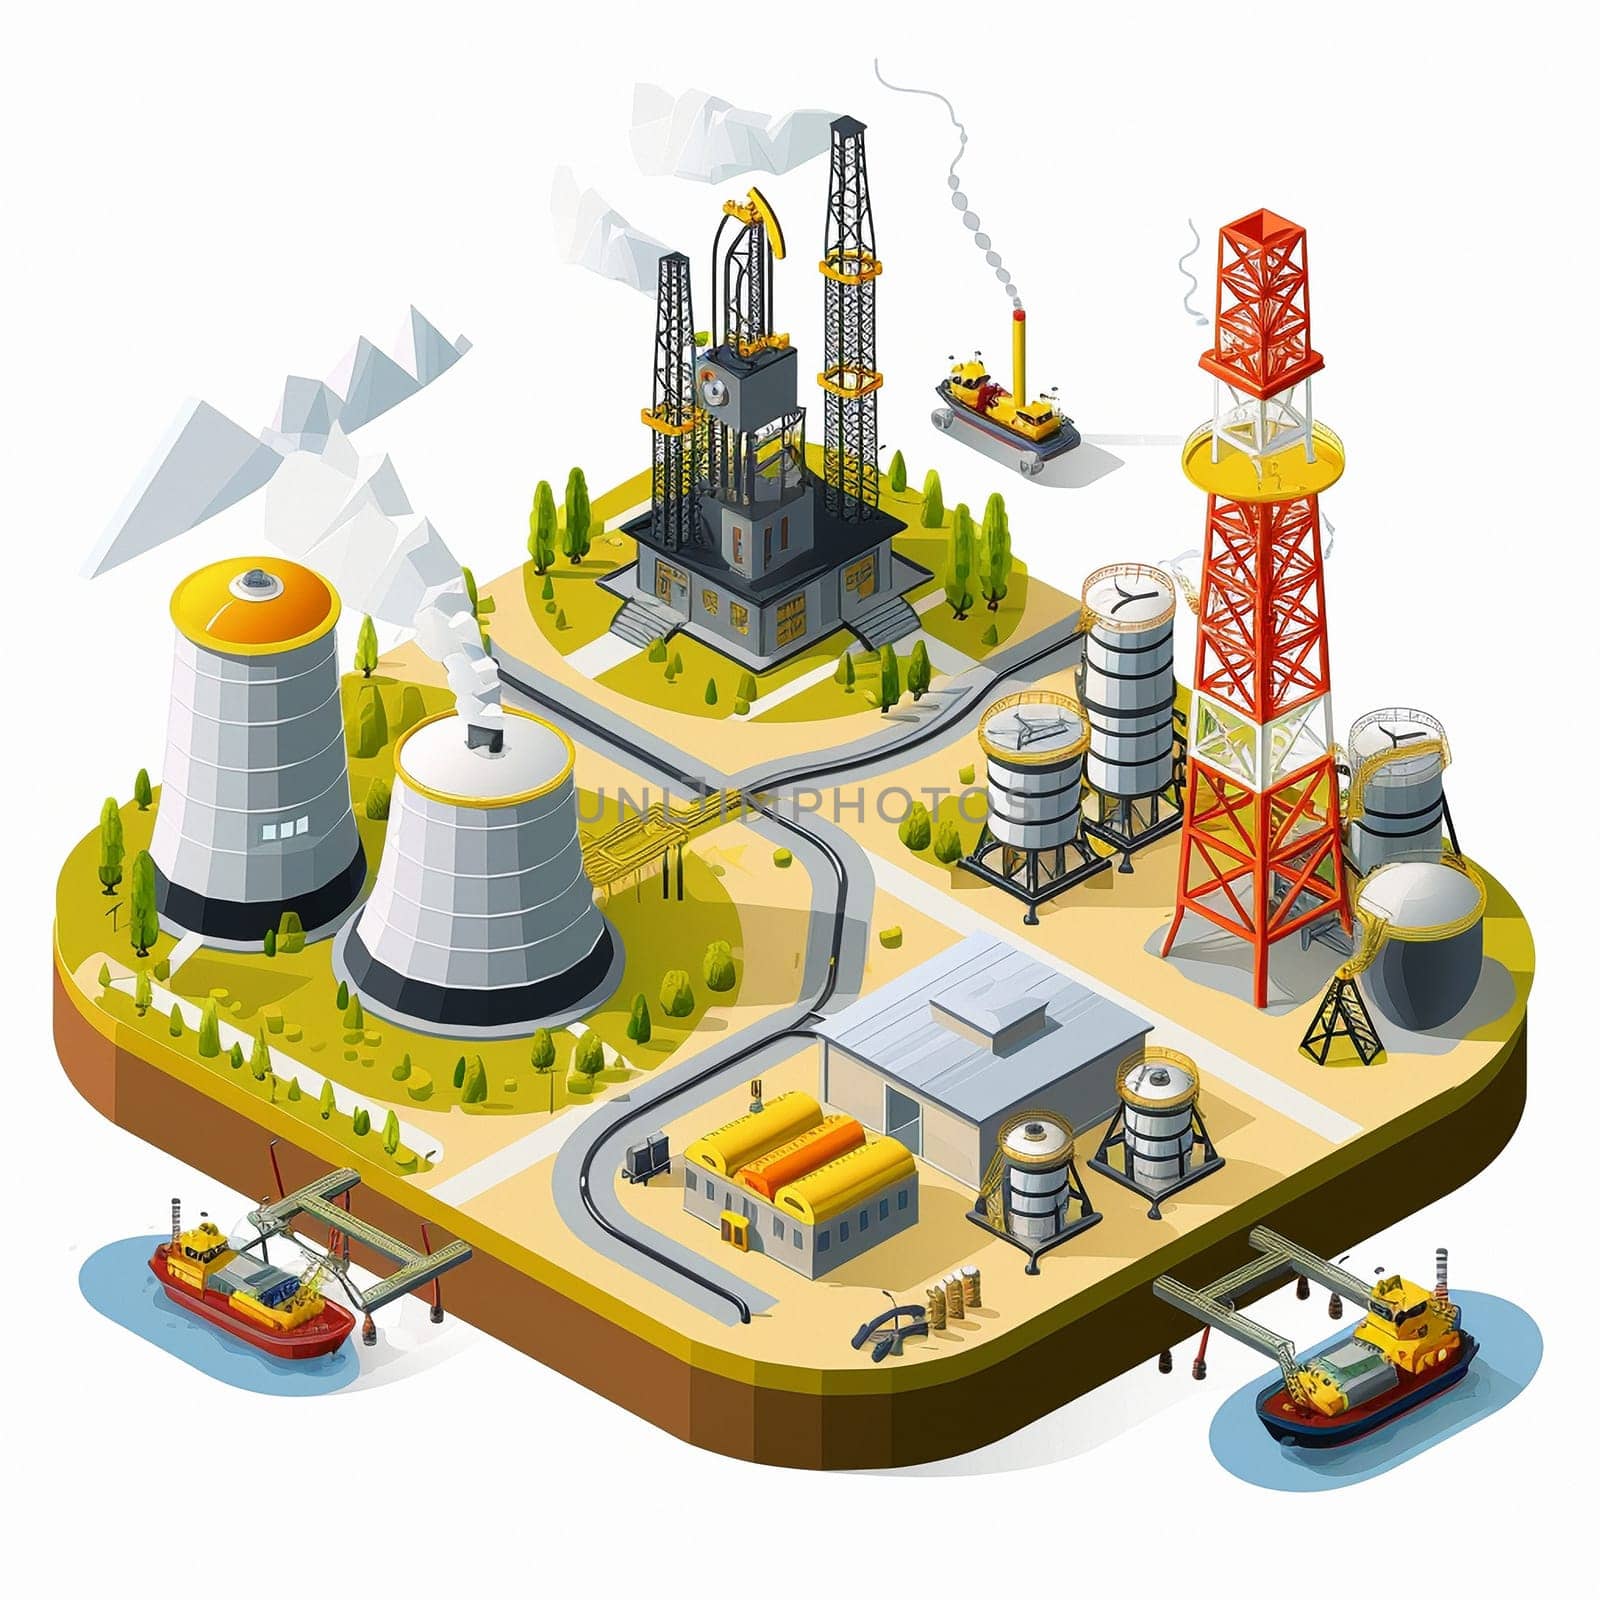 project teamwork in the field of oil production. isometric illustration by NeuroSky